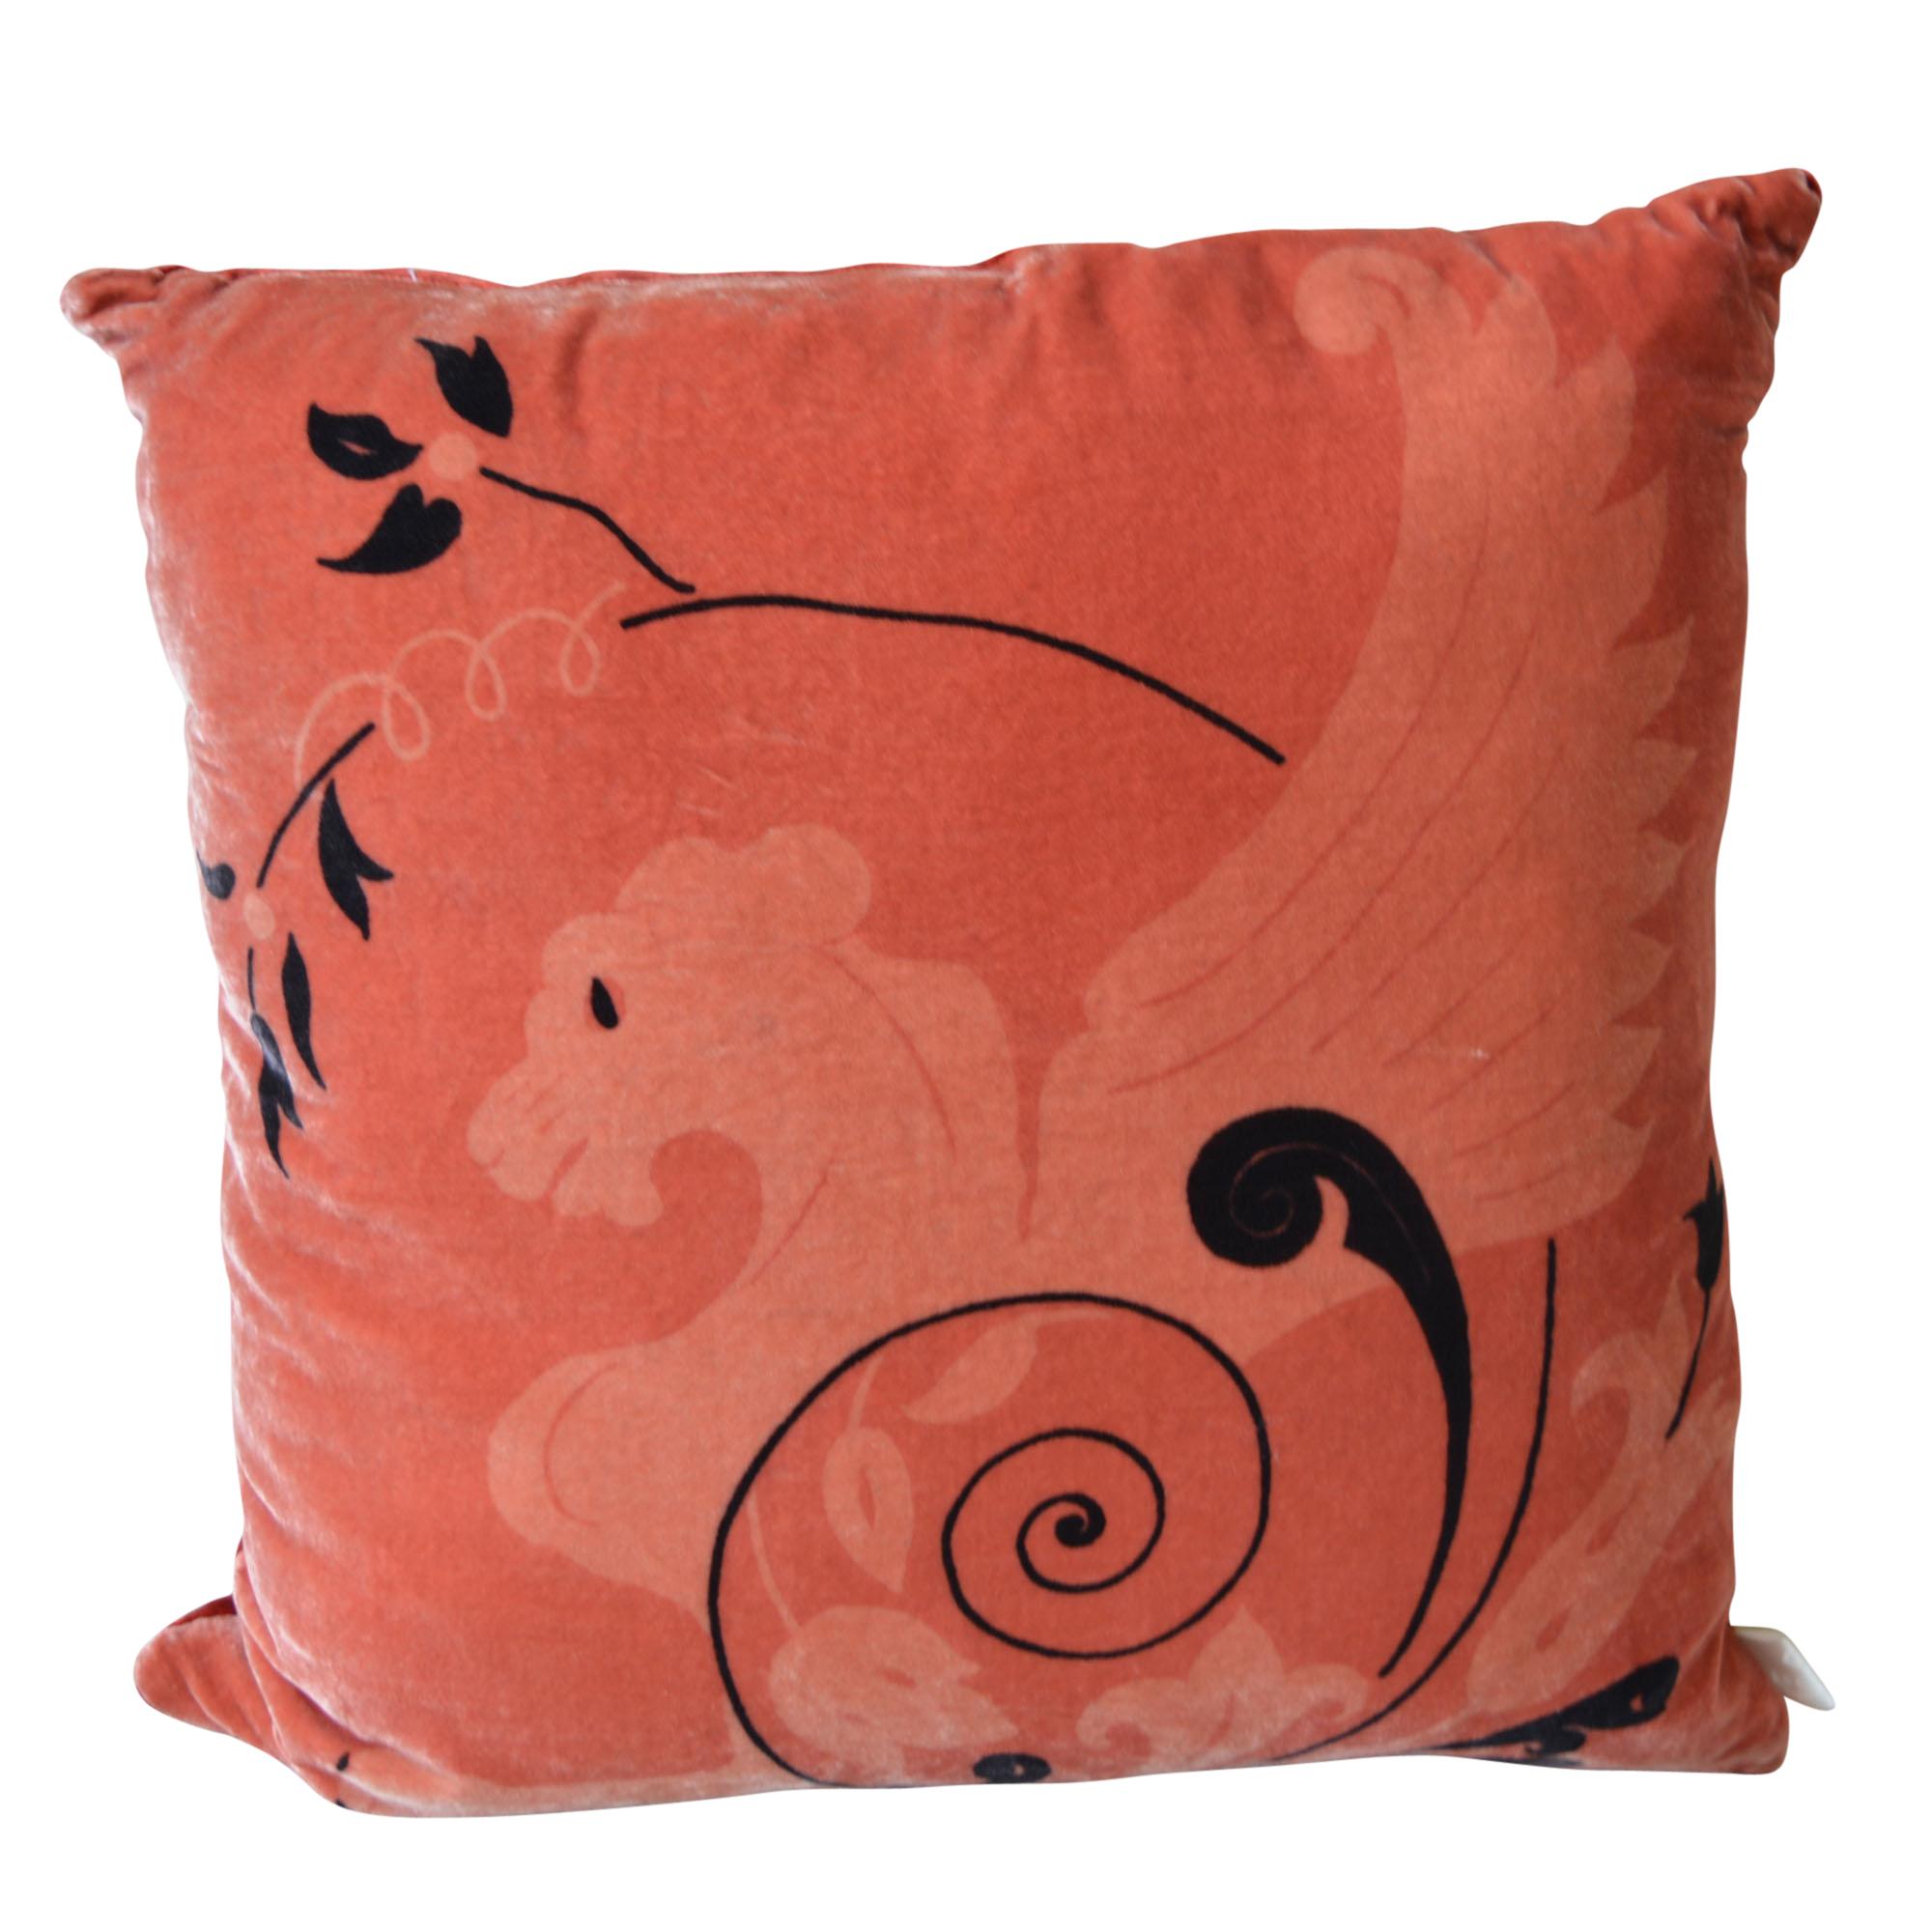 Pair of rich hand-dyed velvet pillows with sphinx design in black on ginger background. The inserts are filled with high quality kapok – natural filling that maintains its shape. When it needs refreshing give it a sunbath. 

Pillow Cover: